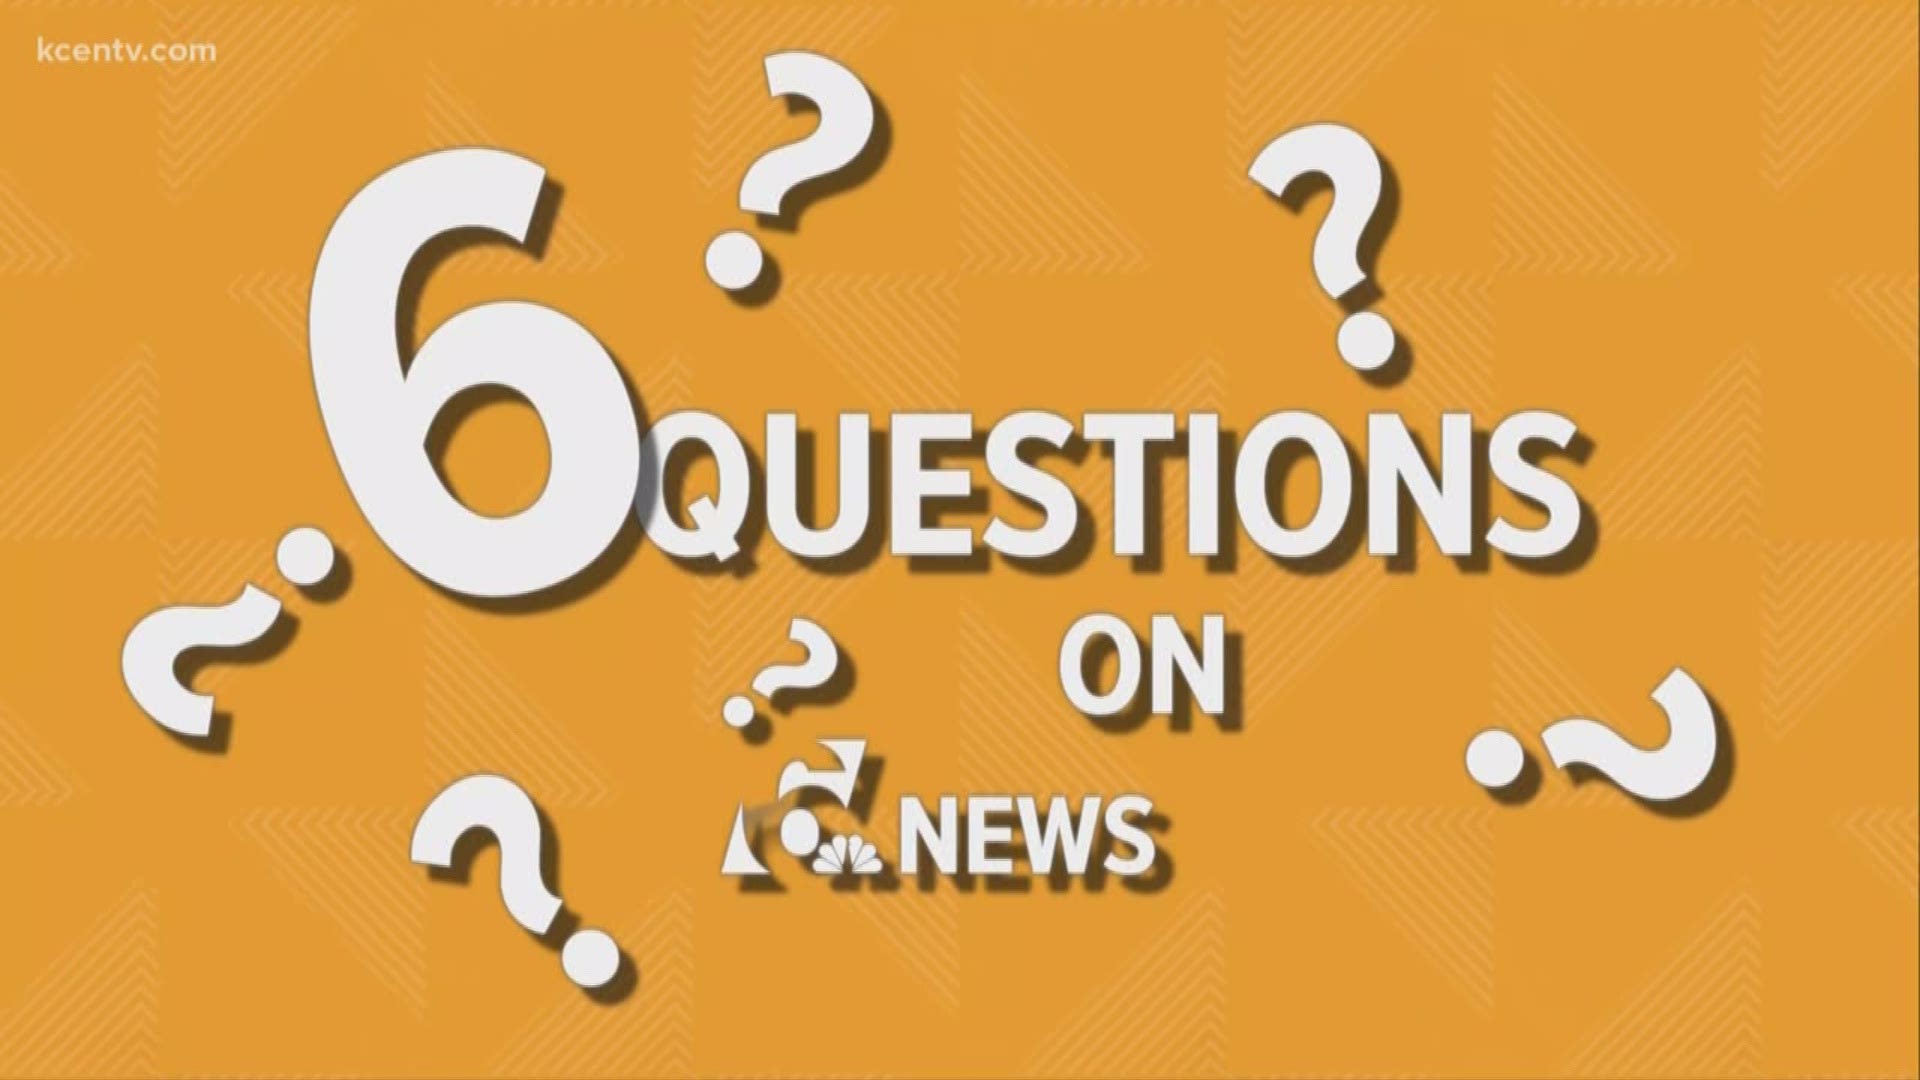 Chip and Joanna play 6 Questions on 6 News with Heidi and Chris.